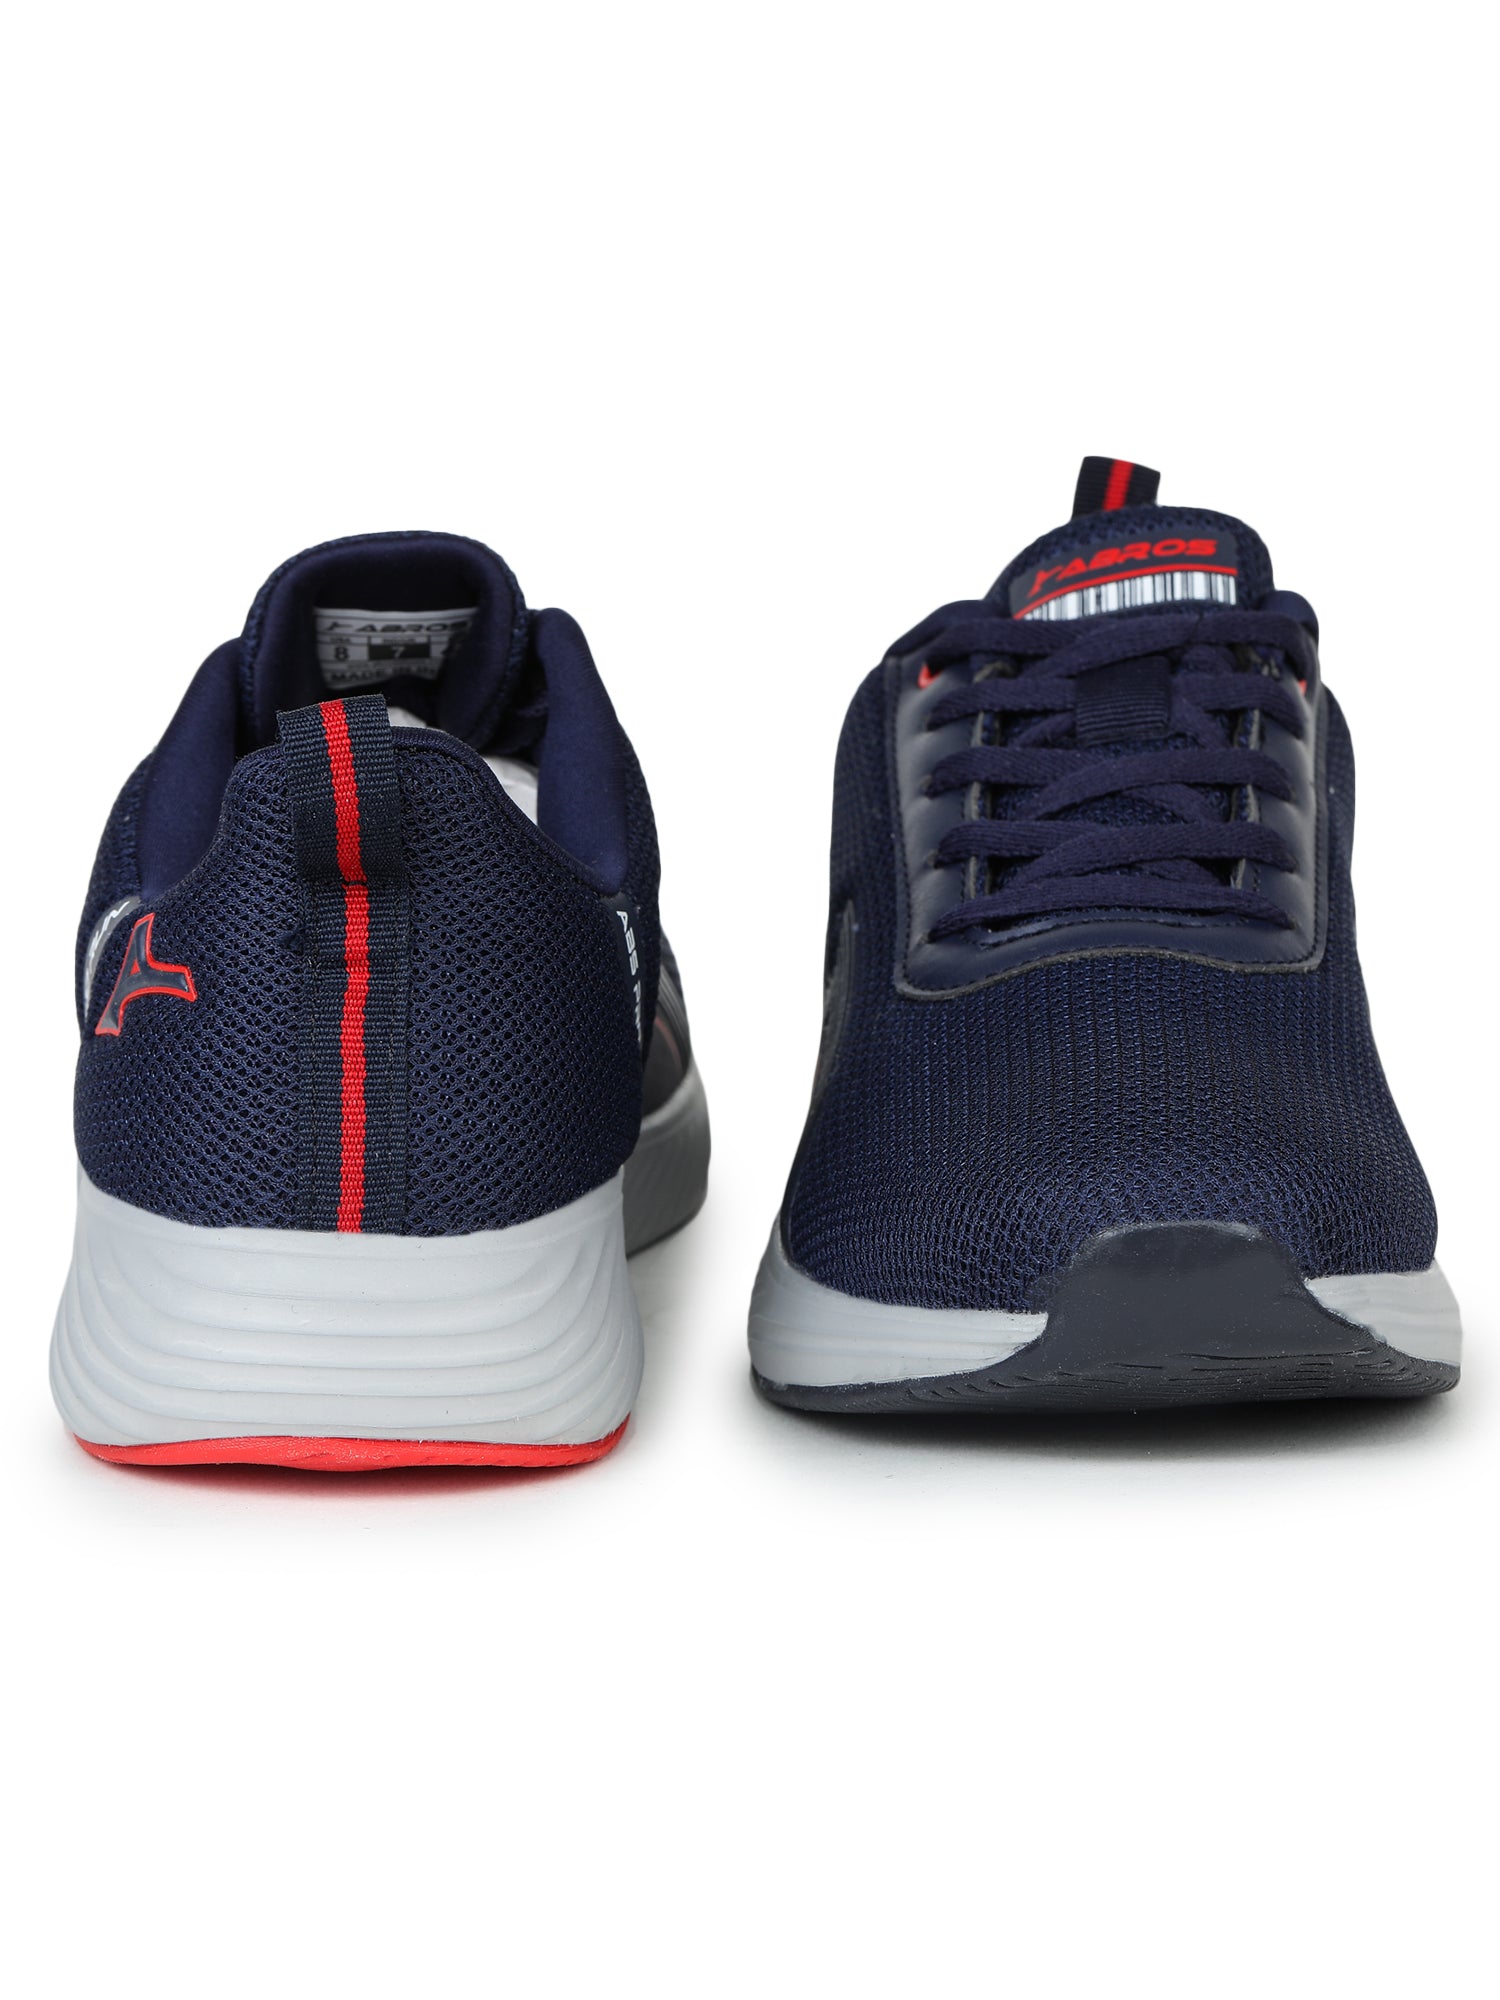 SAIL-M RUNNING SPORTS SHOES FOR MEN